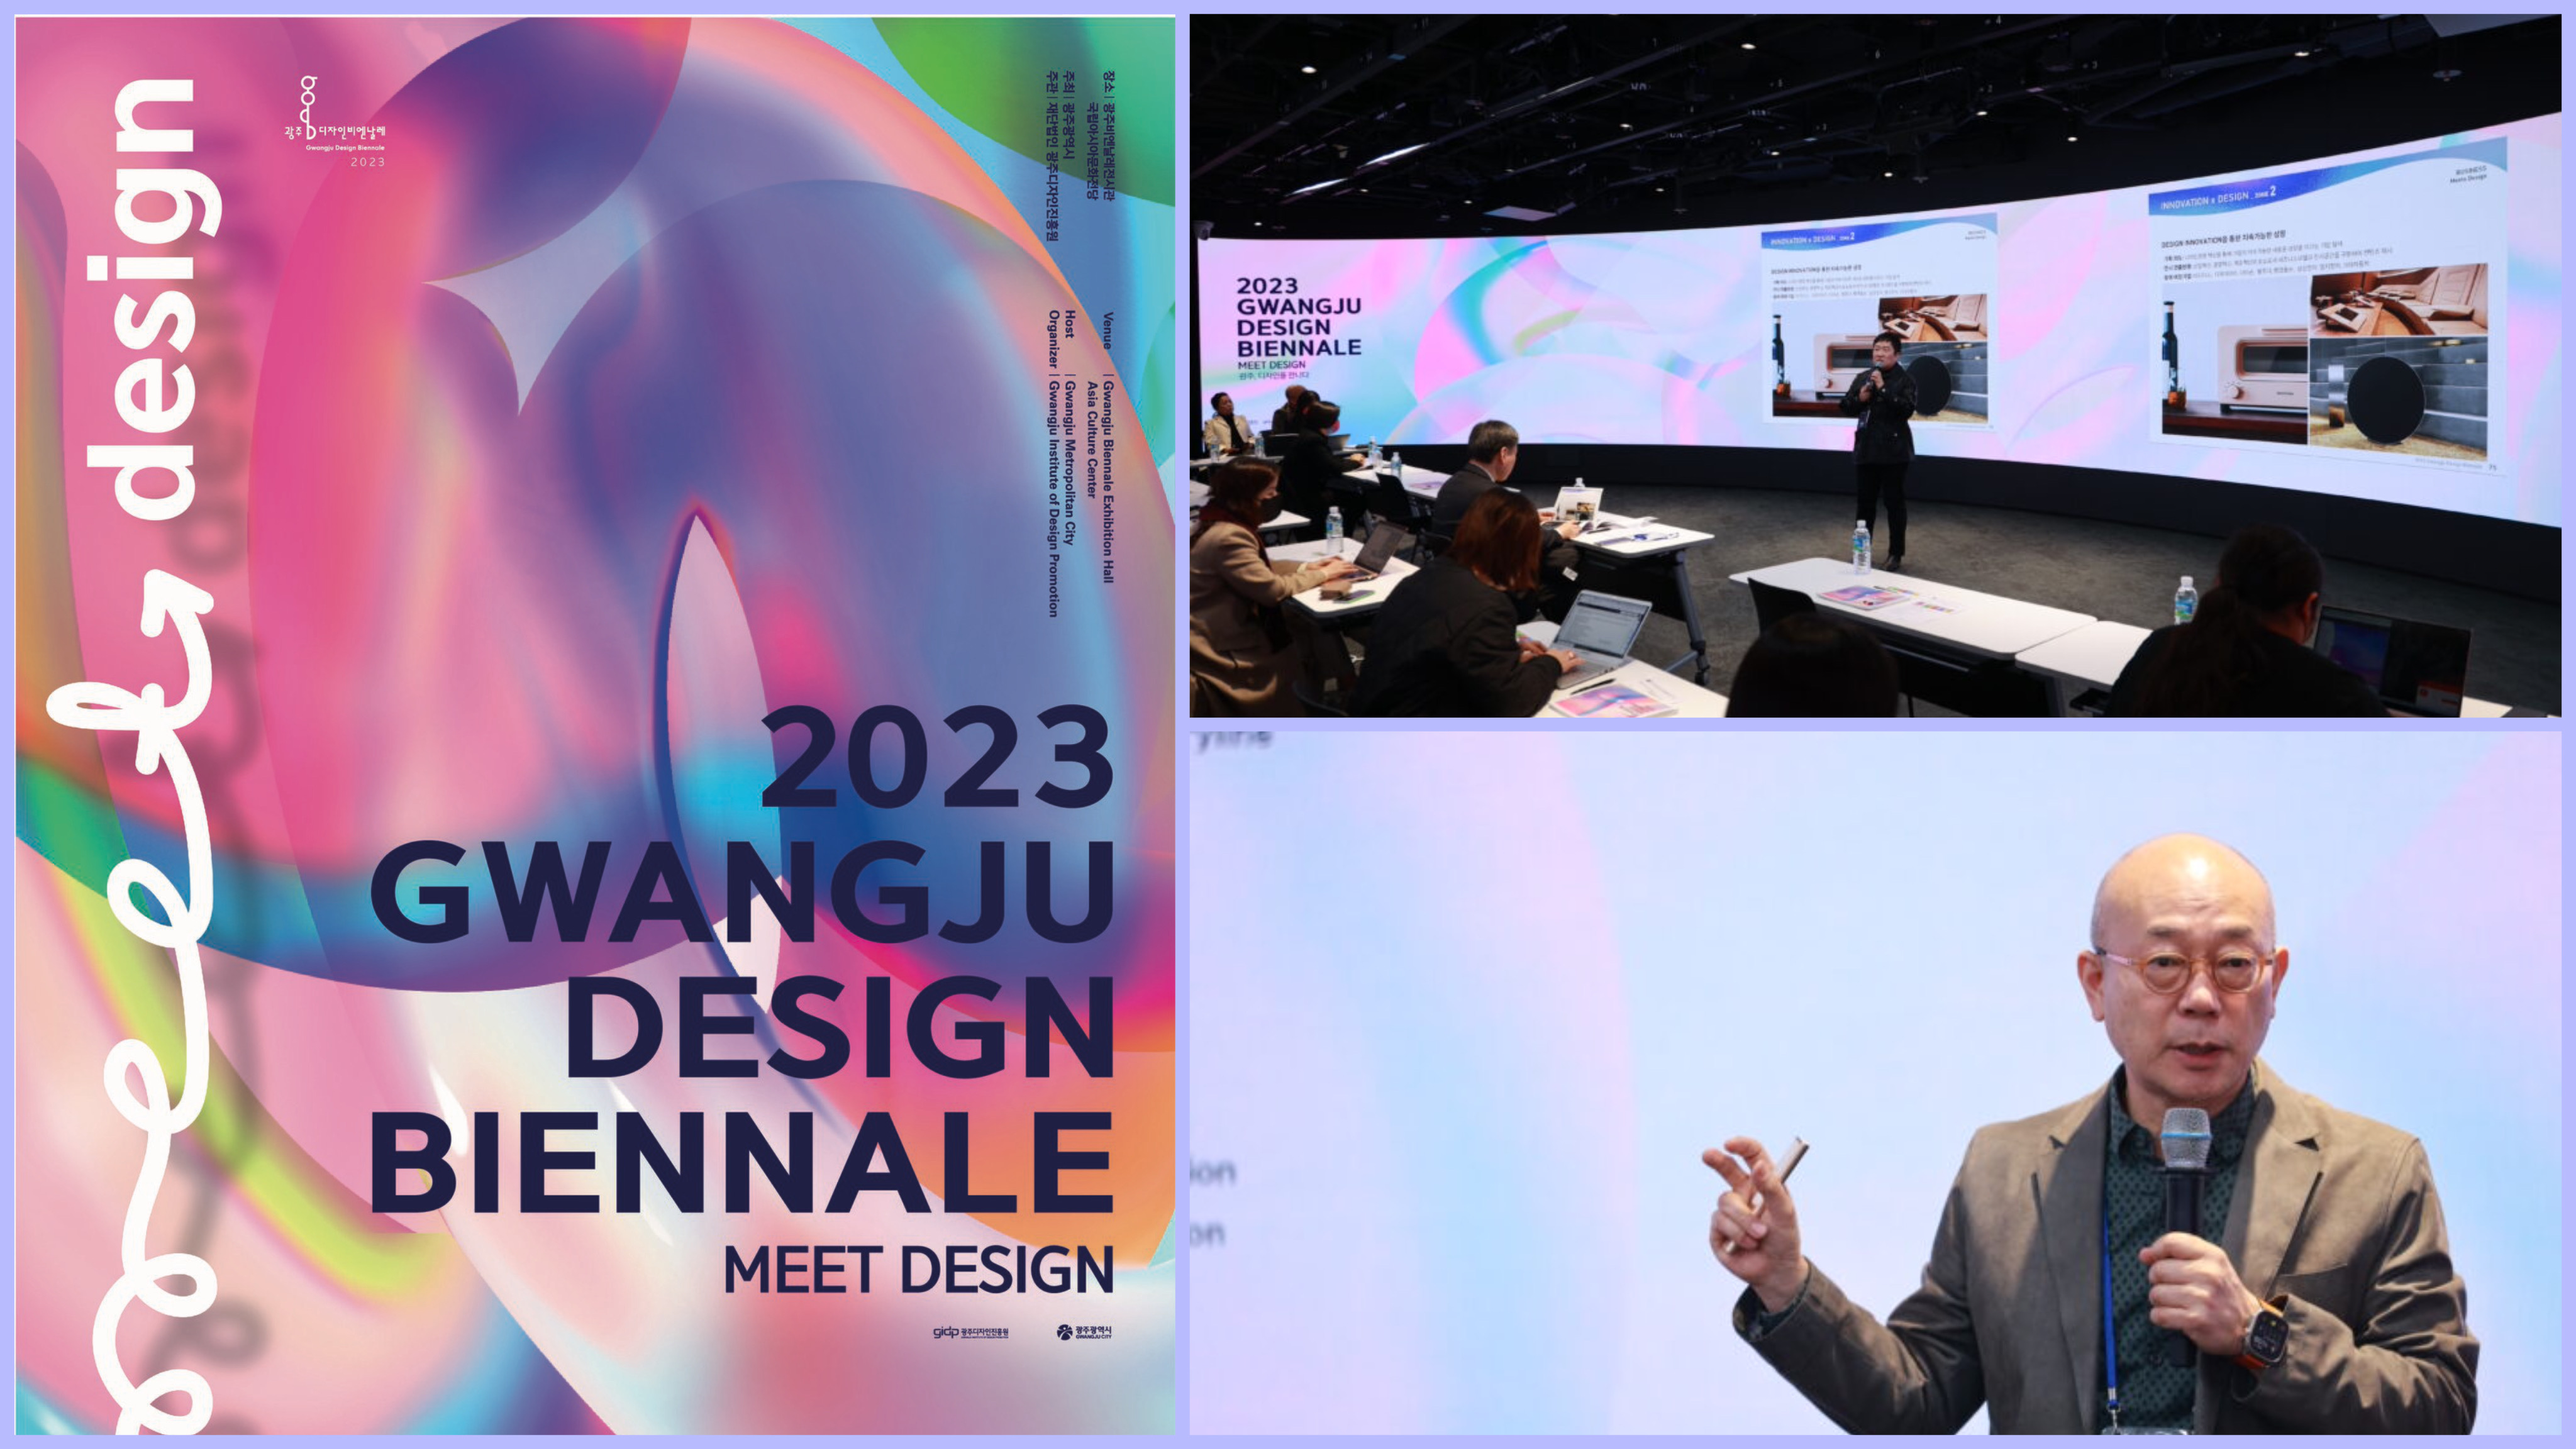 “MEET DESIGN” 2023 Gwangju Design  Biennale, can feel and experieNce the design without difficulty.